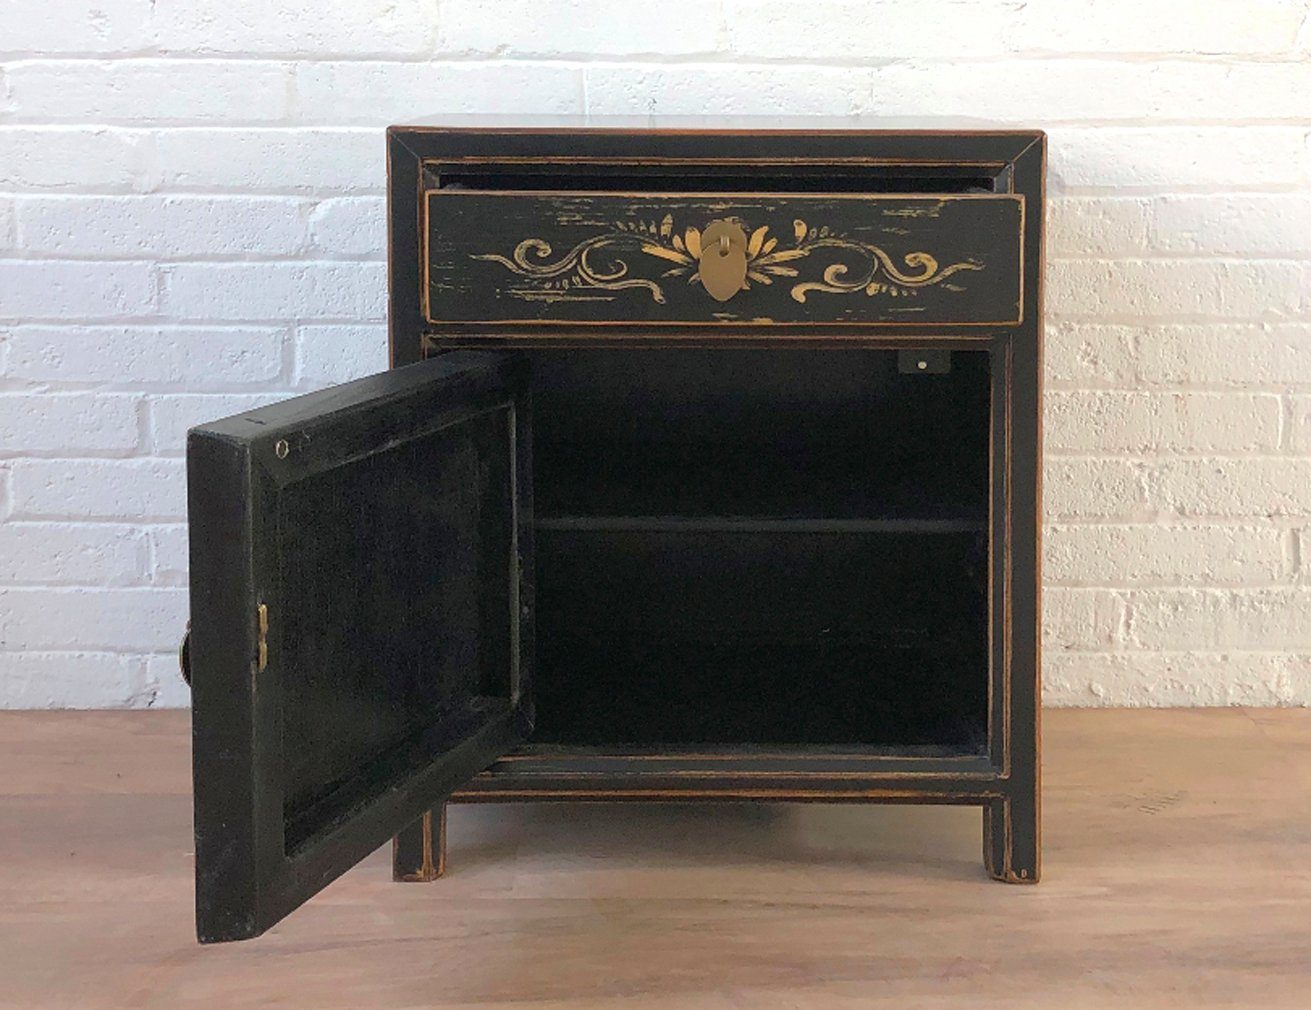 Chinese bedside table "LesNoirs" - Art. 35191-11